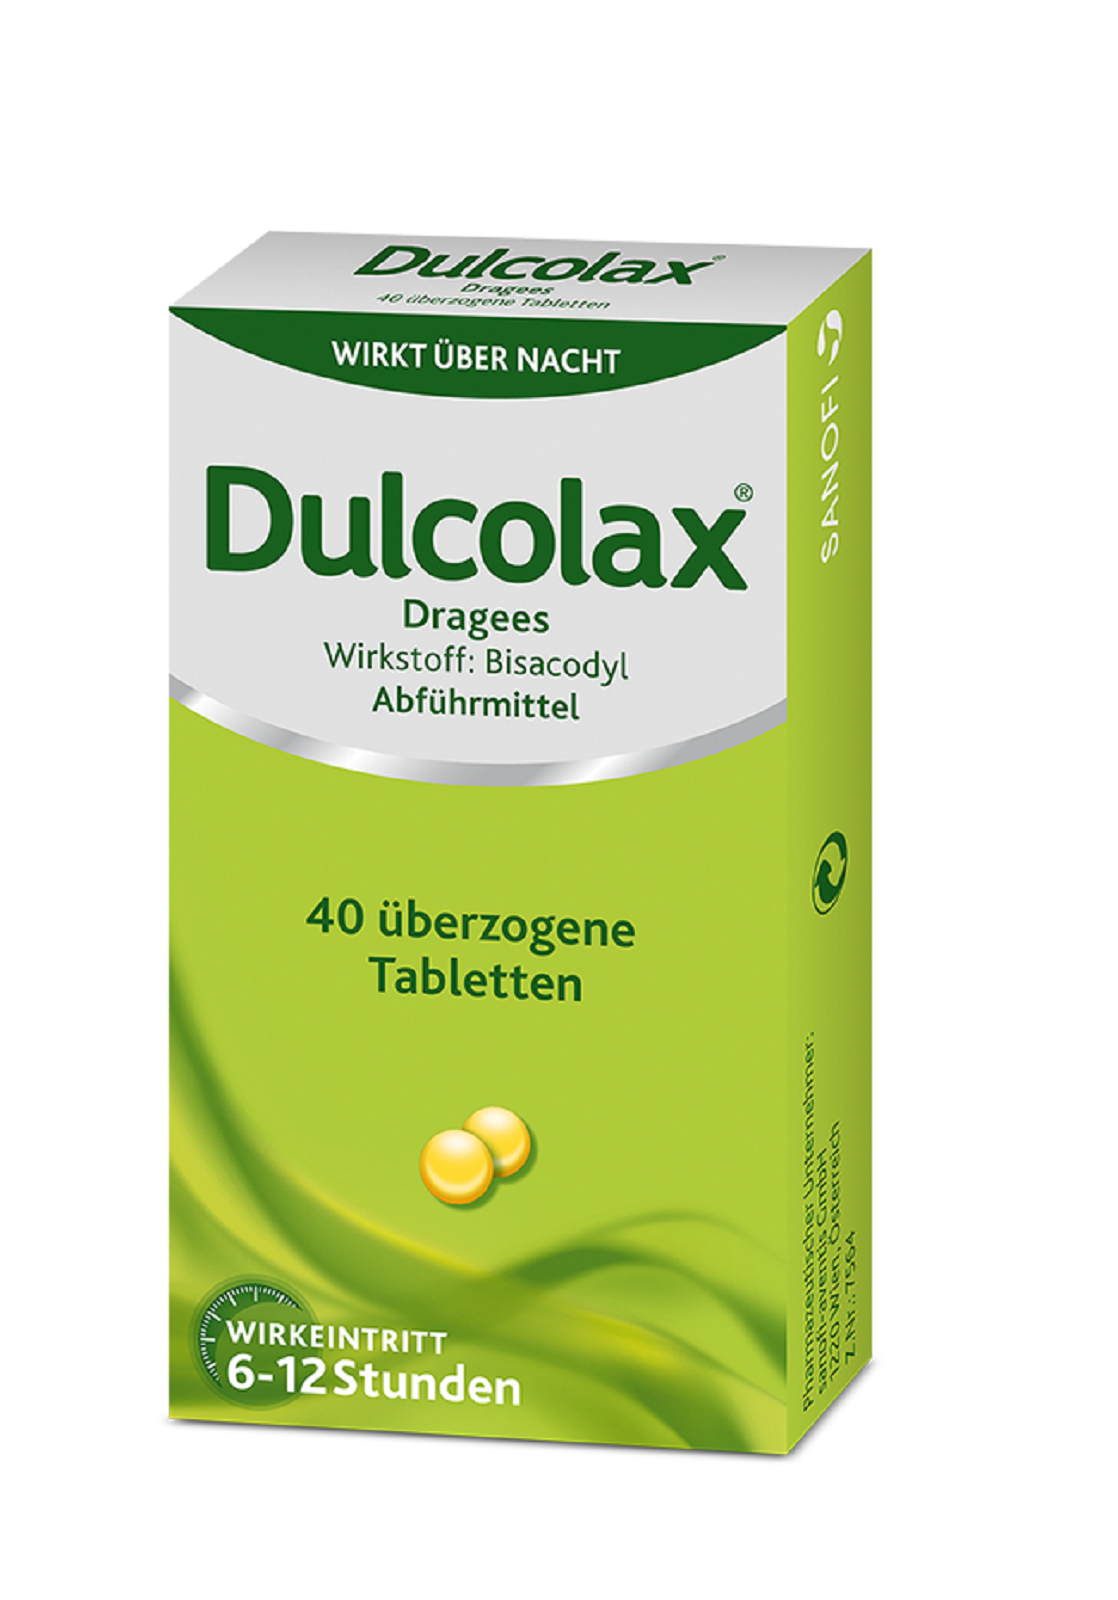 Dulcolax - Dragees